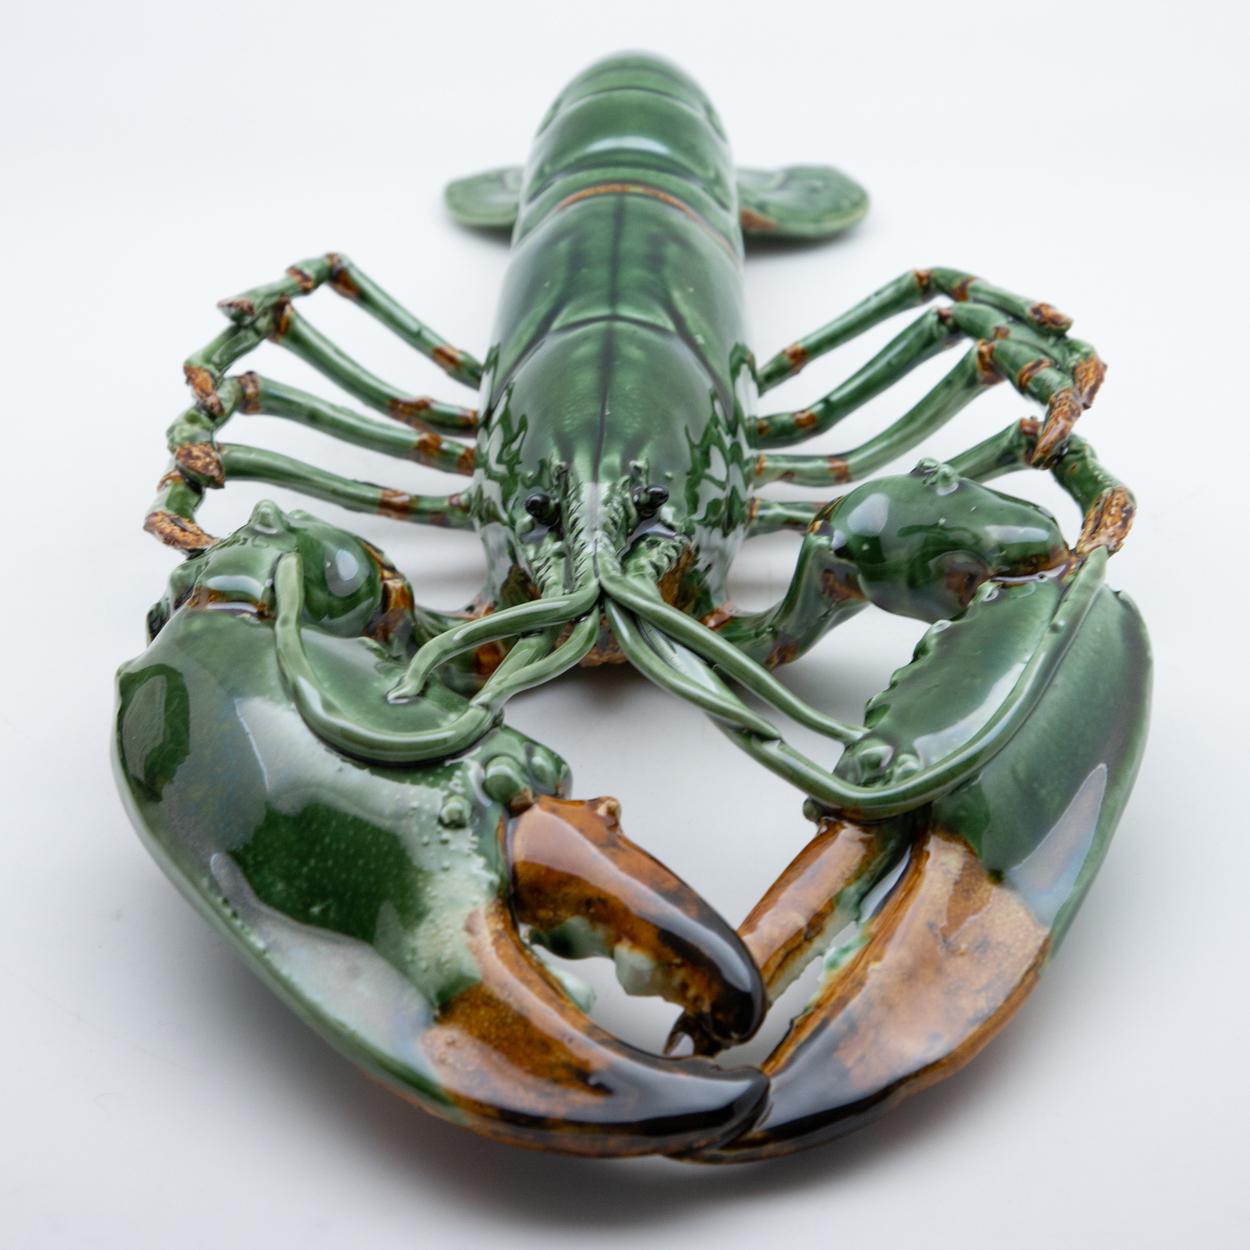 Portuguese Handmade Pallissy or Majollica Large Green Ceramic Crab

Ceramic sea life art has long been a tradition in Portugal.  It was inspired by the 